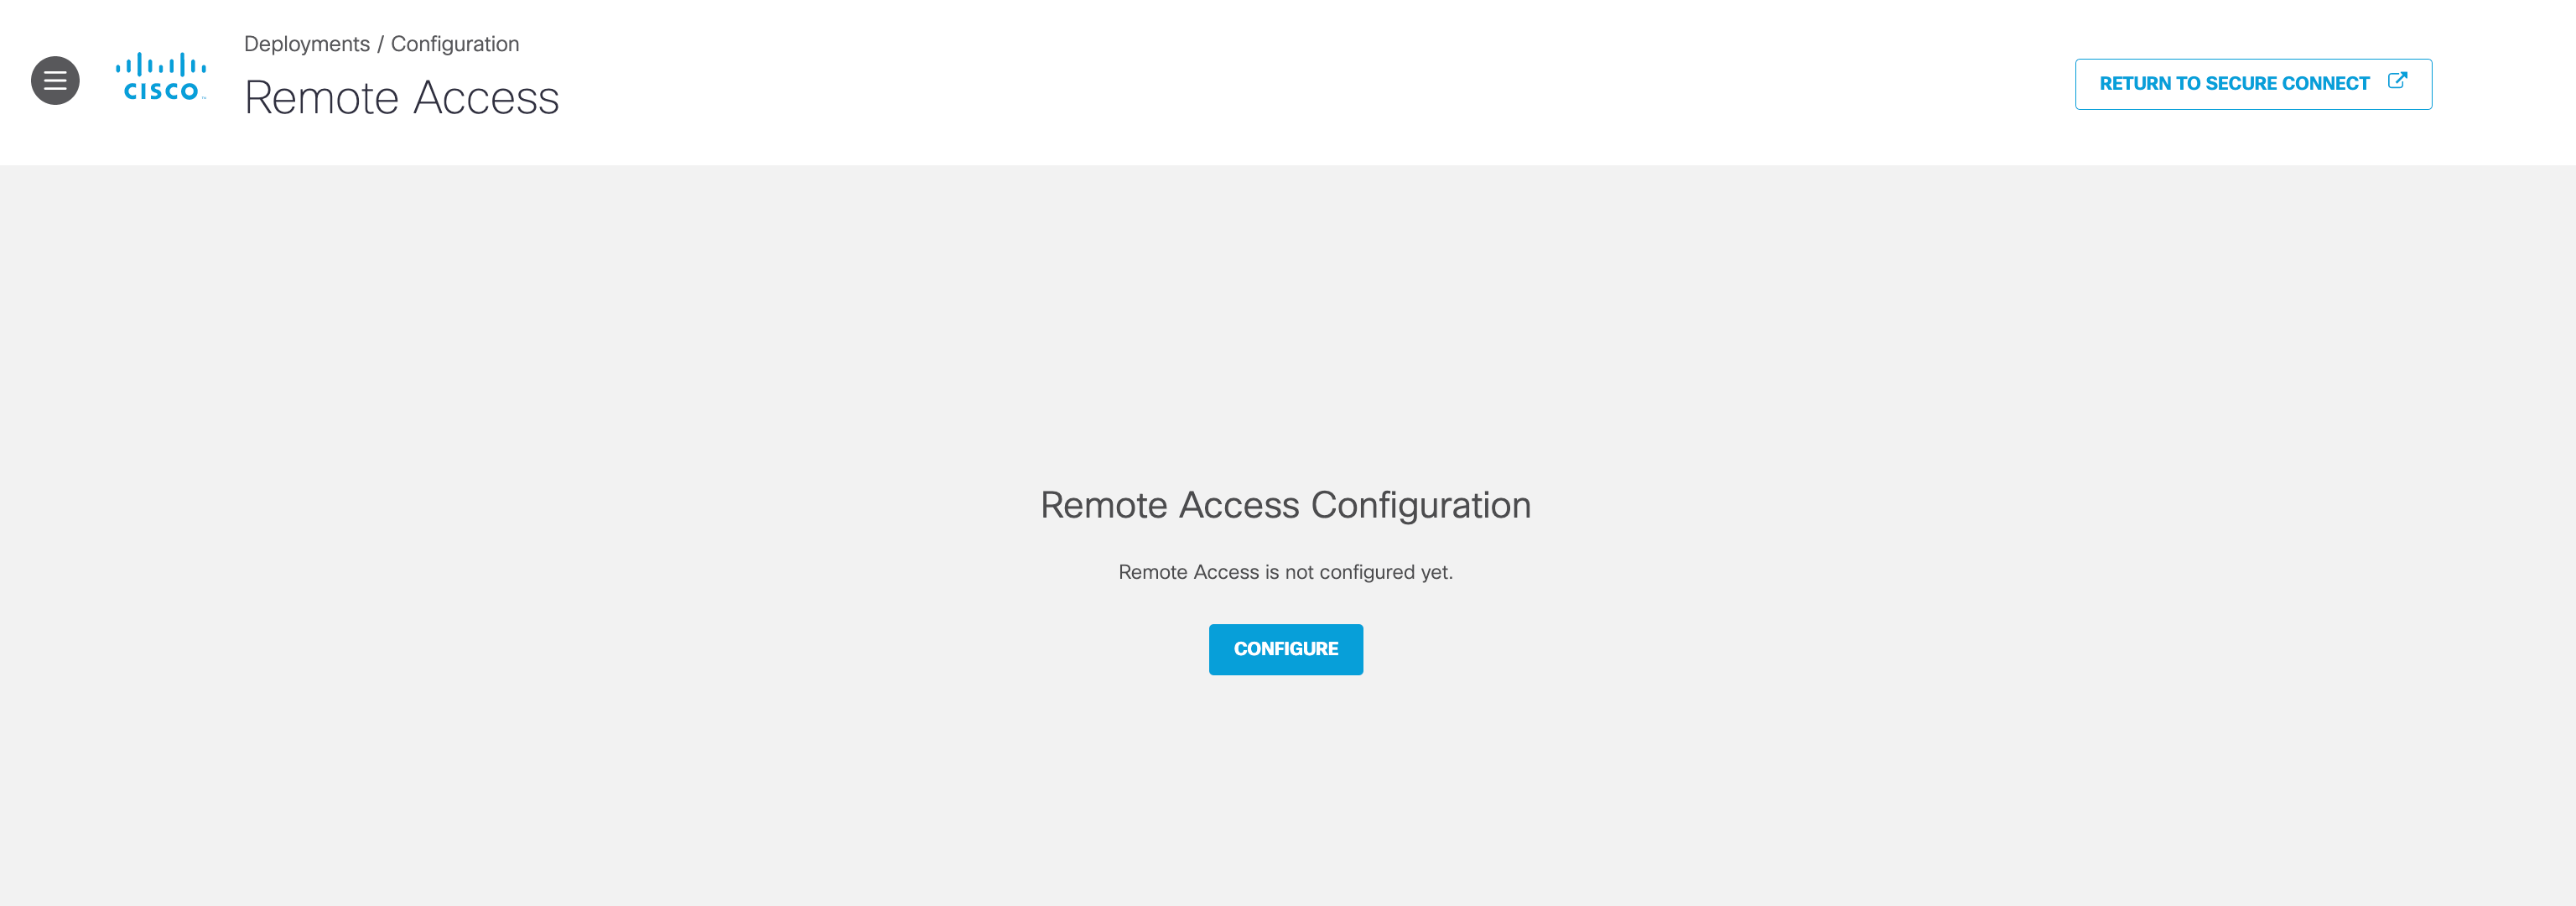 2. Remote Access Blank Page - UMB side.png